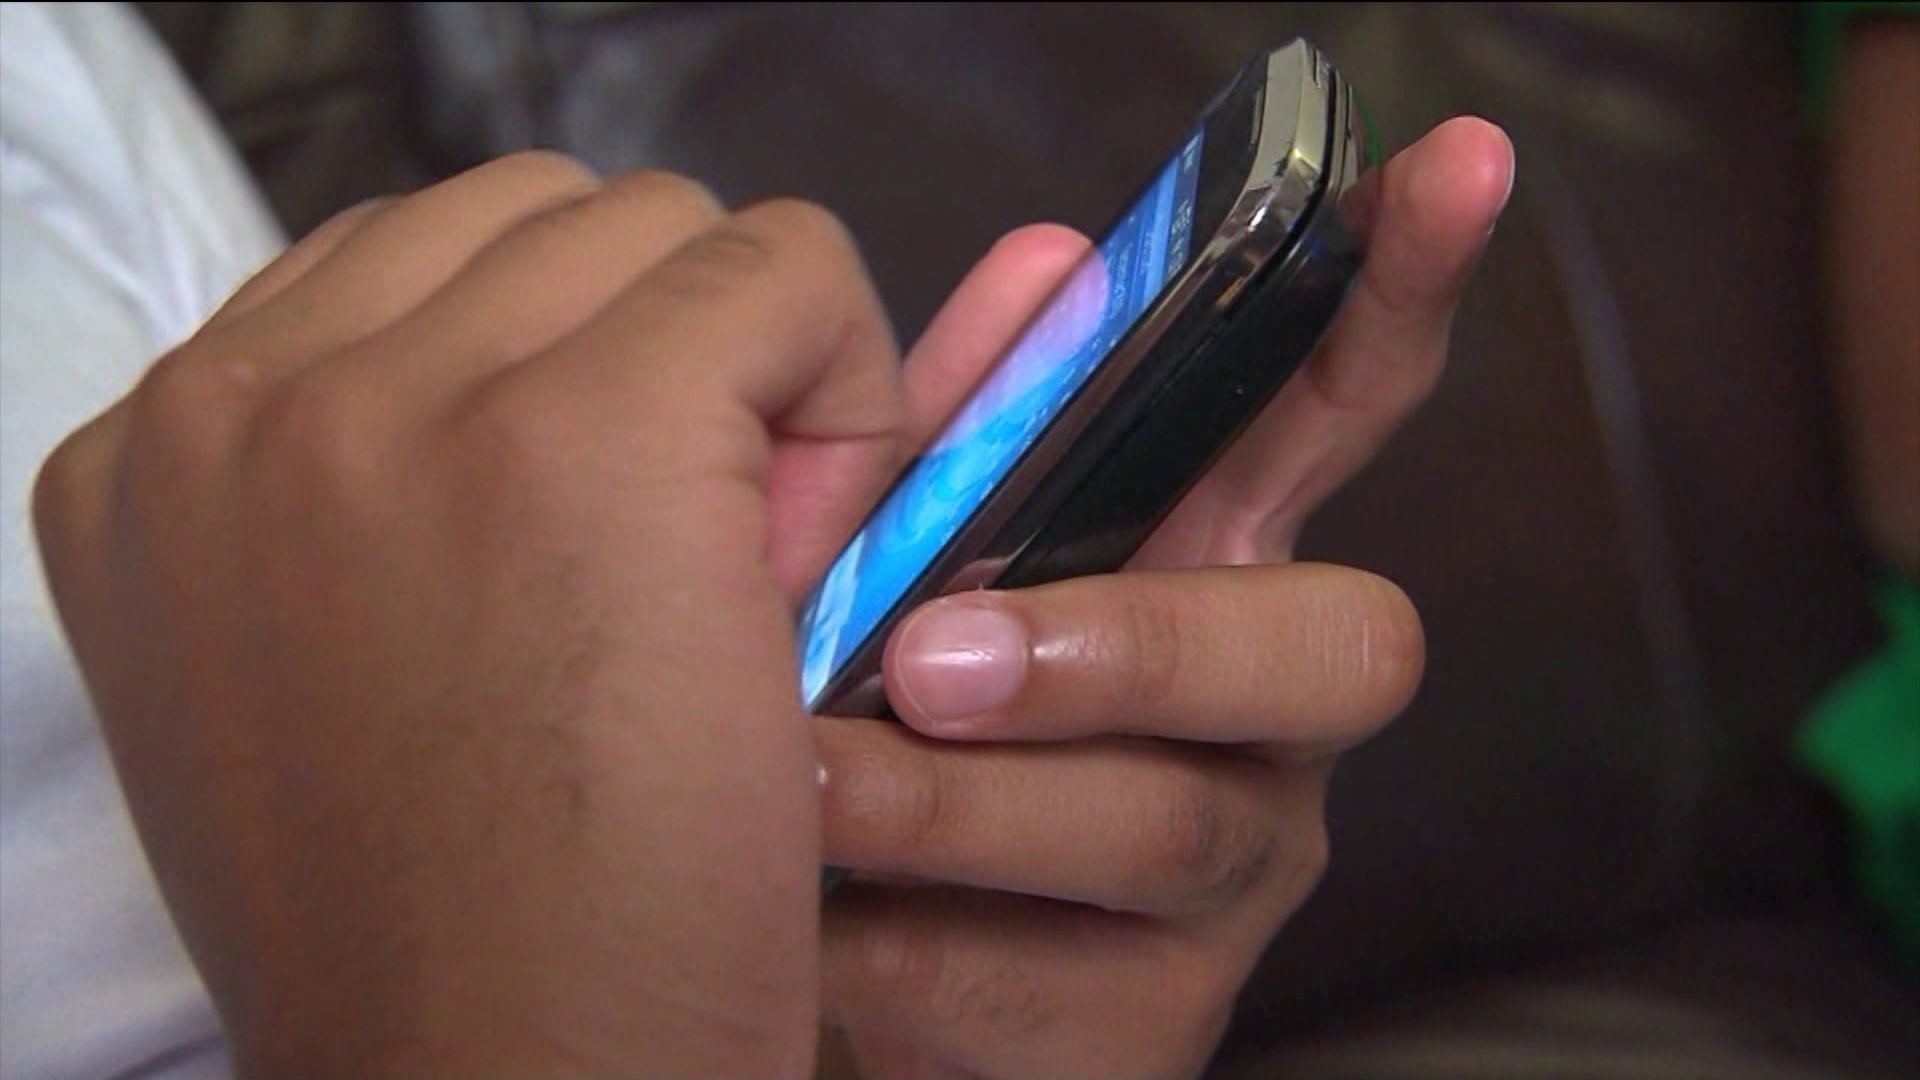 FOX61 Family First - Too much screen time for kids?